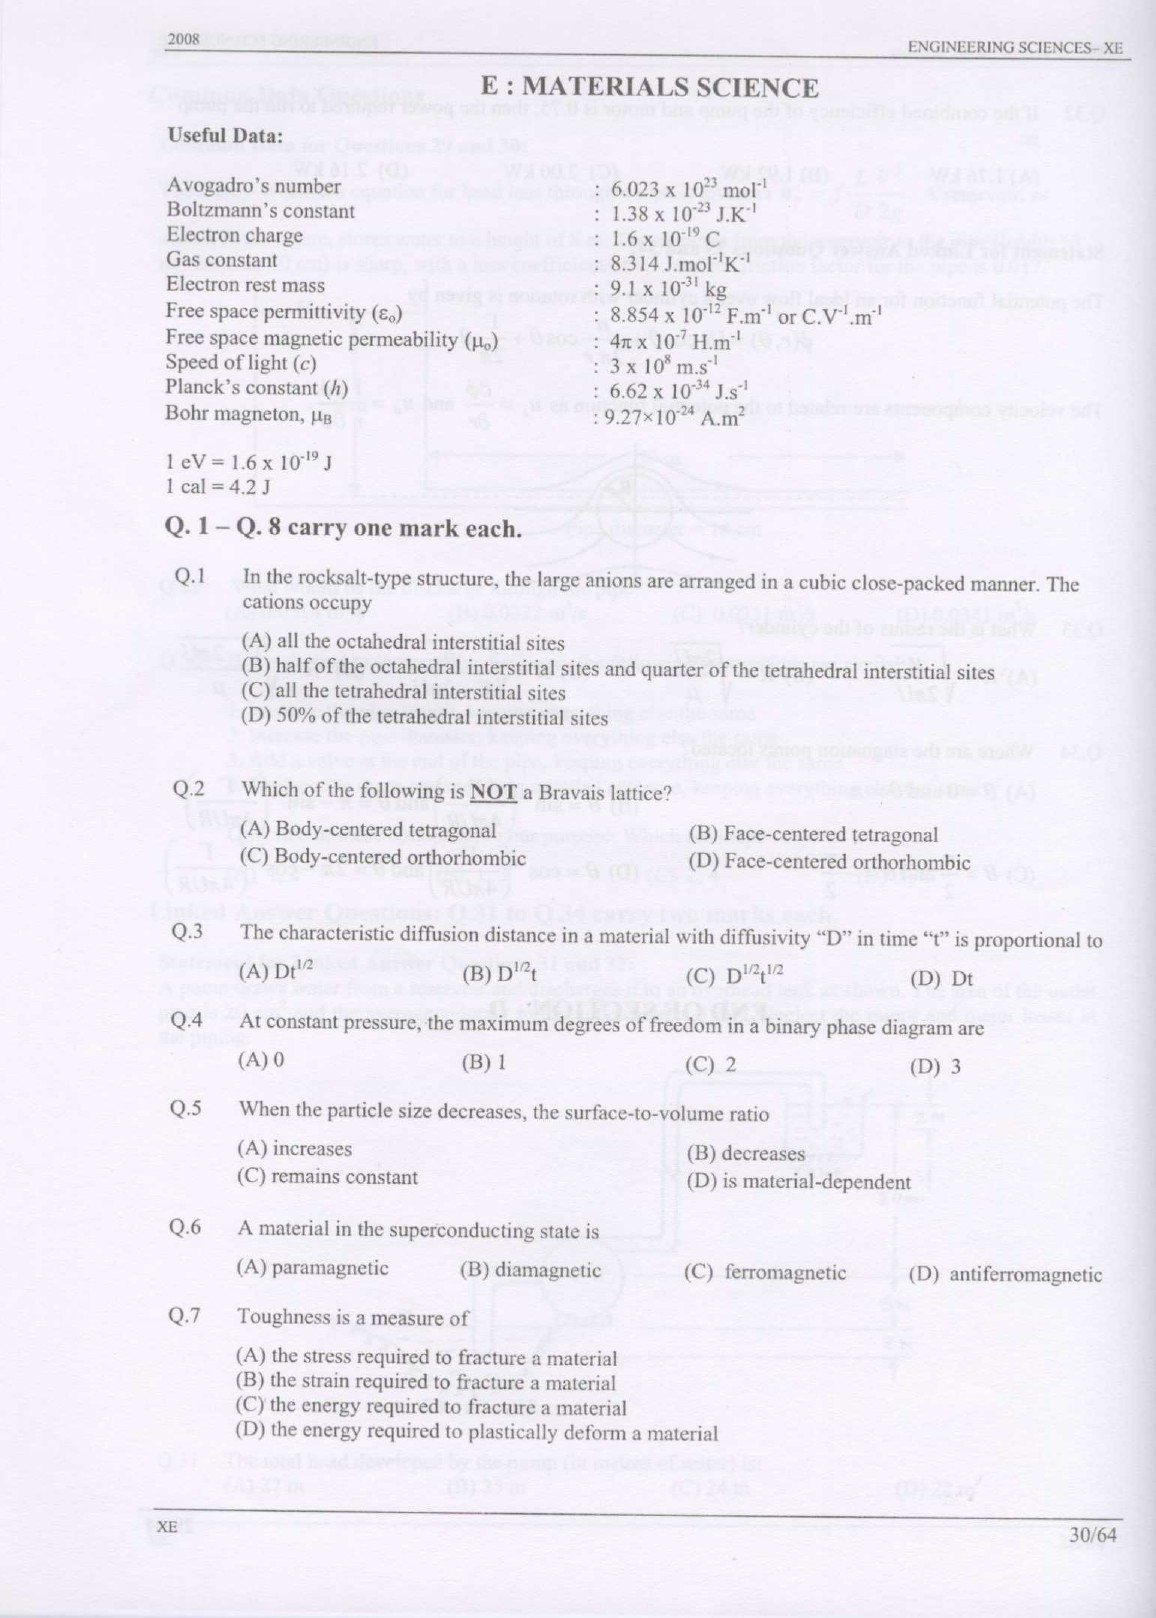 GATE Exam Question Paper 2008 Engineering Sciences 30